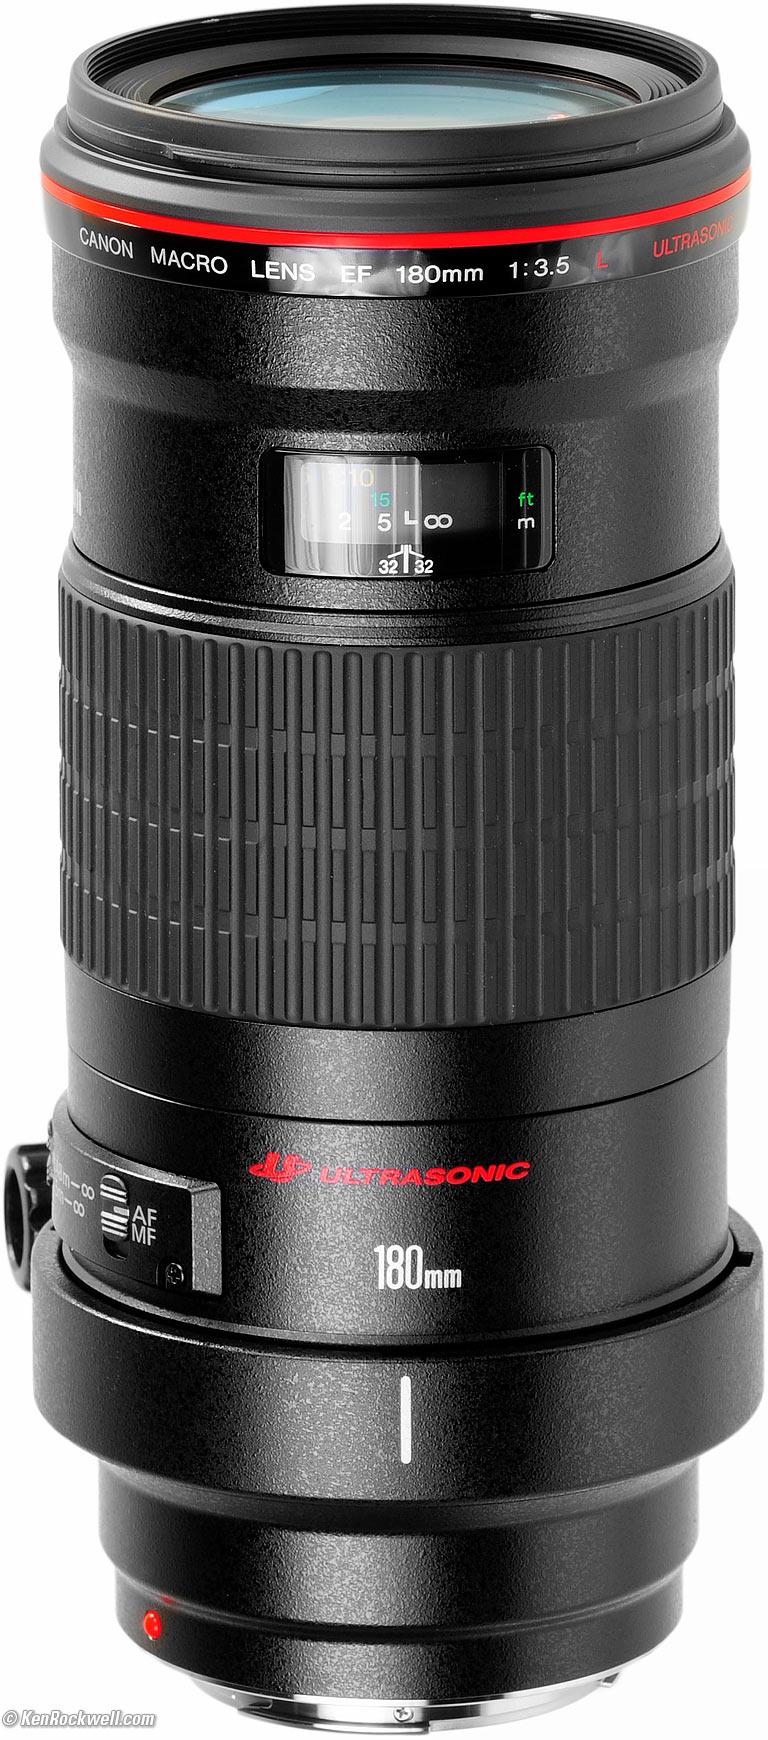 canon 35 350mm review ken rockwell